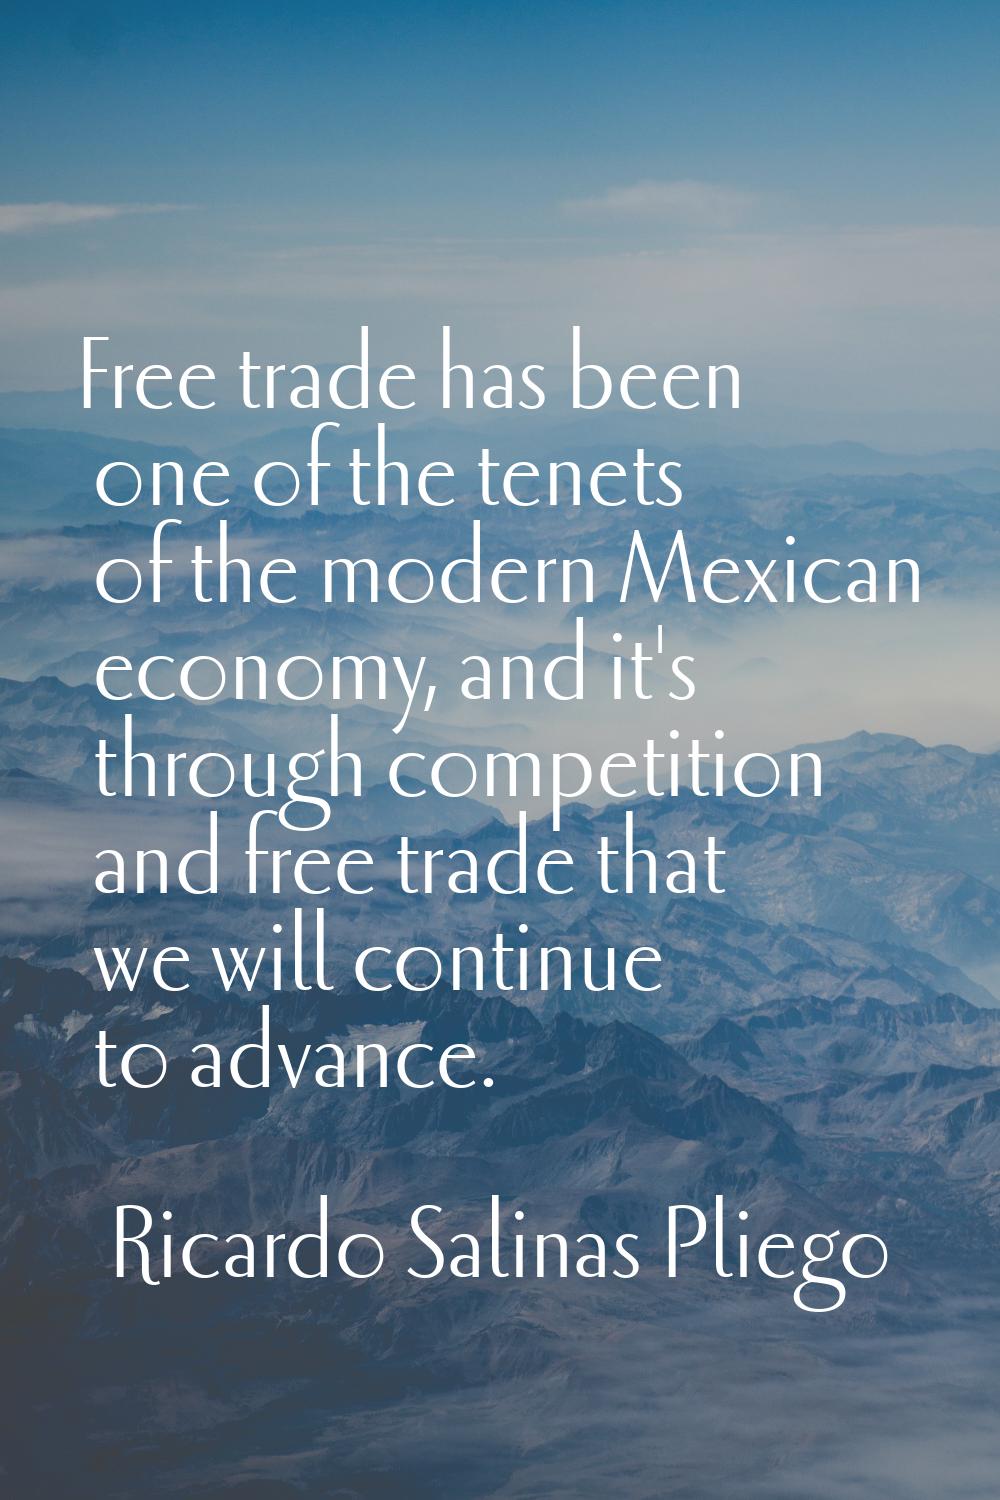 Free trade has been one of the tenets of the modern Mexican economy, and it's through competition a